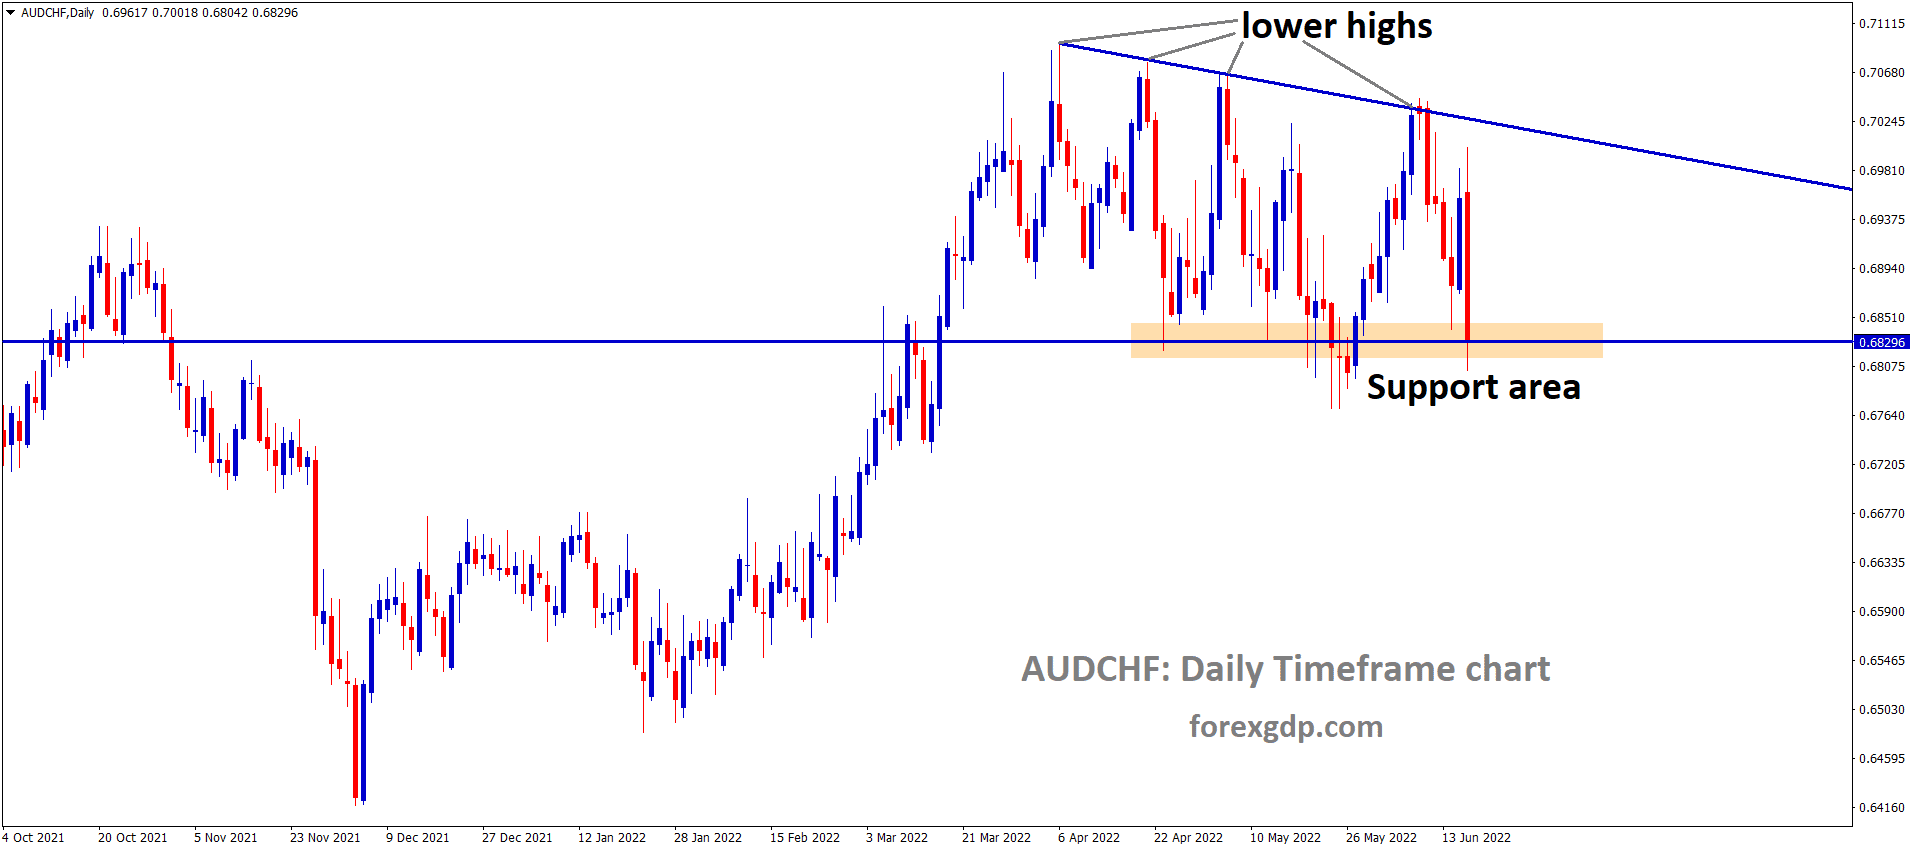 AUDCHF is moving in the Descending Triangle pattern and the market has reached the Horizontal Support area of the Pattern.